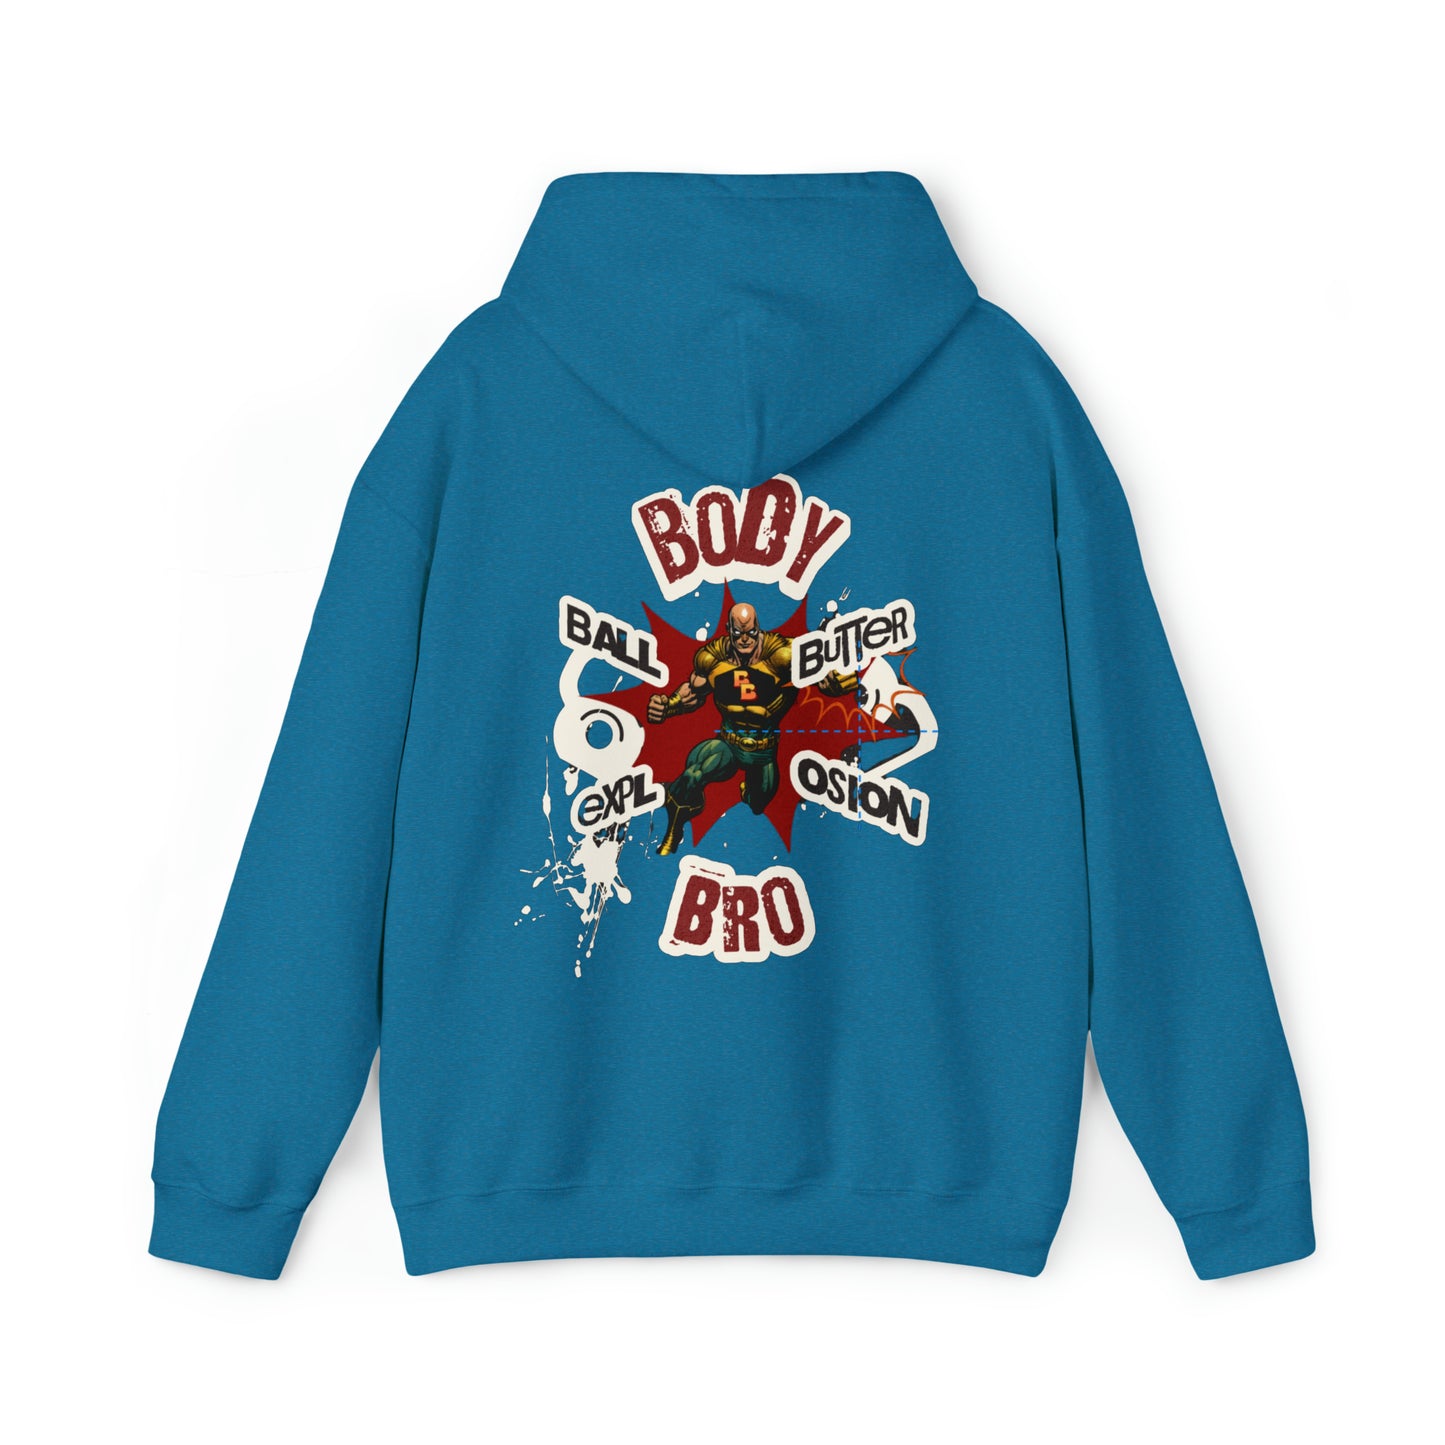 Body Bro Fusion Ball Butter Unisex Heavy Blend™ Hooded Sweatshirt, Humorous Workout Hoodie, Gift for Gym Enthusiasts, Trendy Urban Fashion Pullover, Unique Graphic Apparel